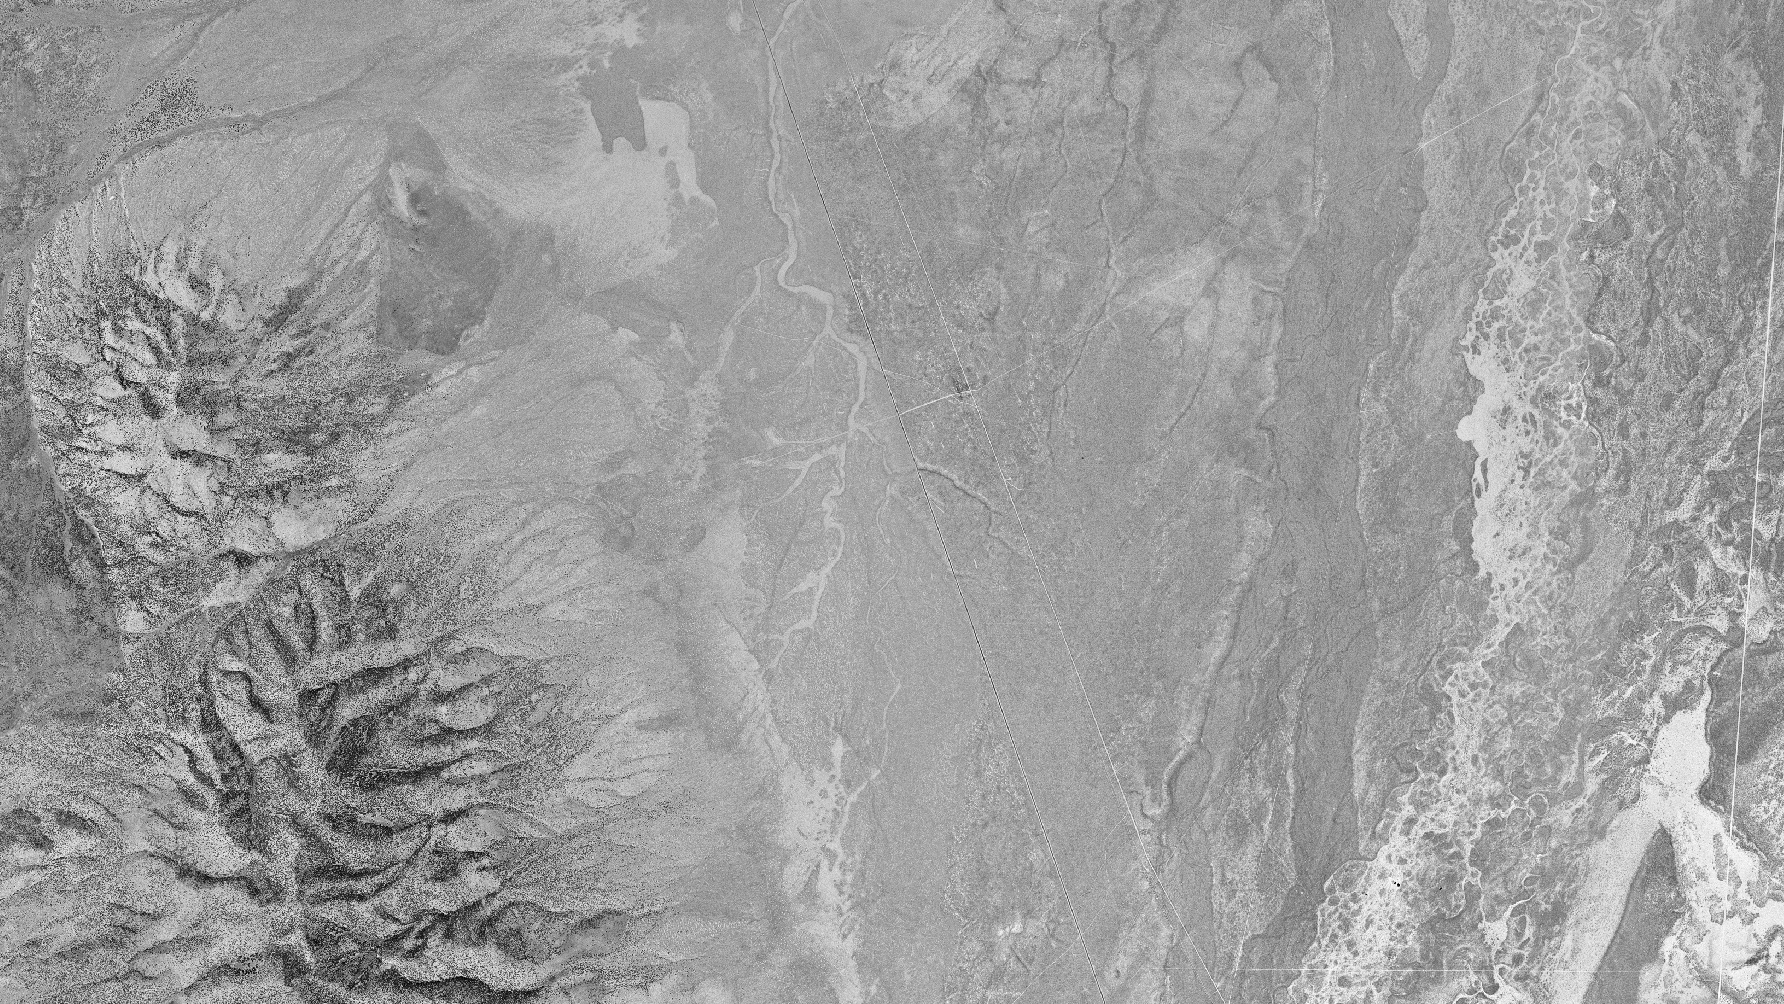 Historical imagery shows intact sagebrush range in the Great Basin area of Nevada.